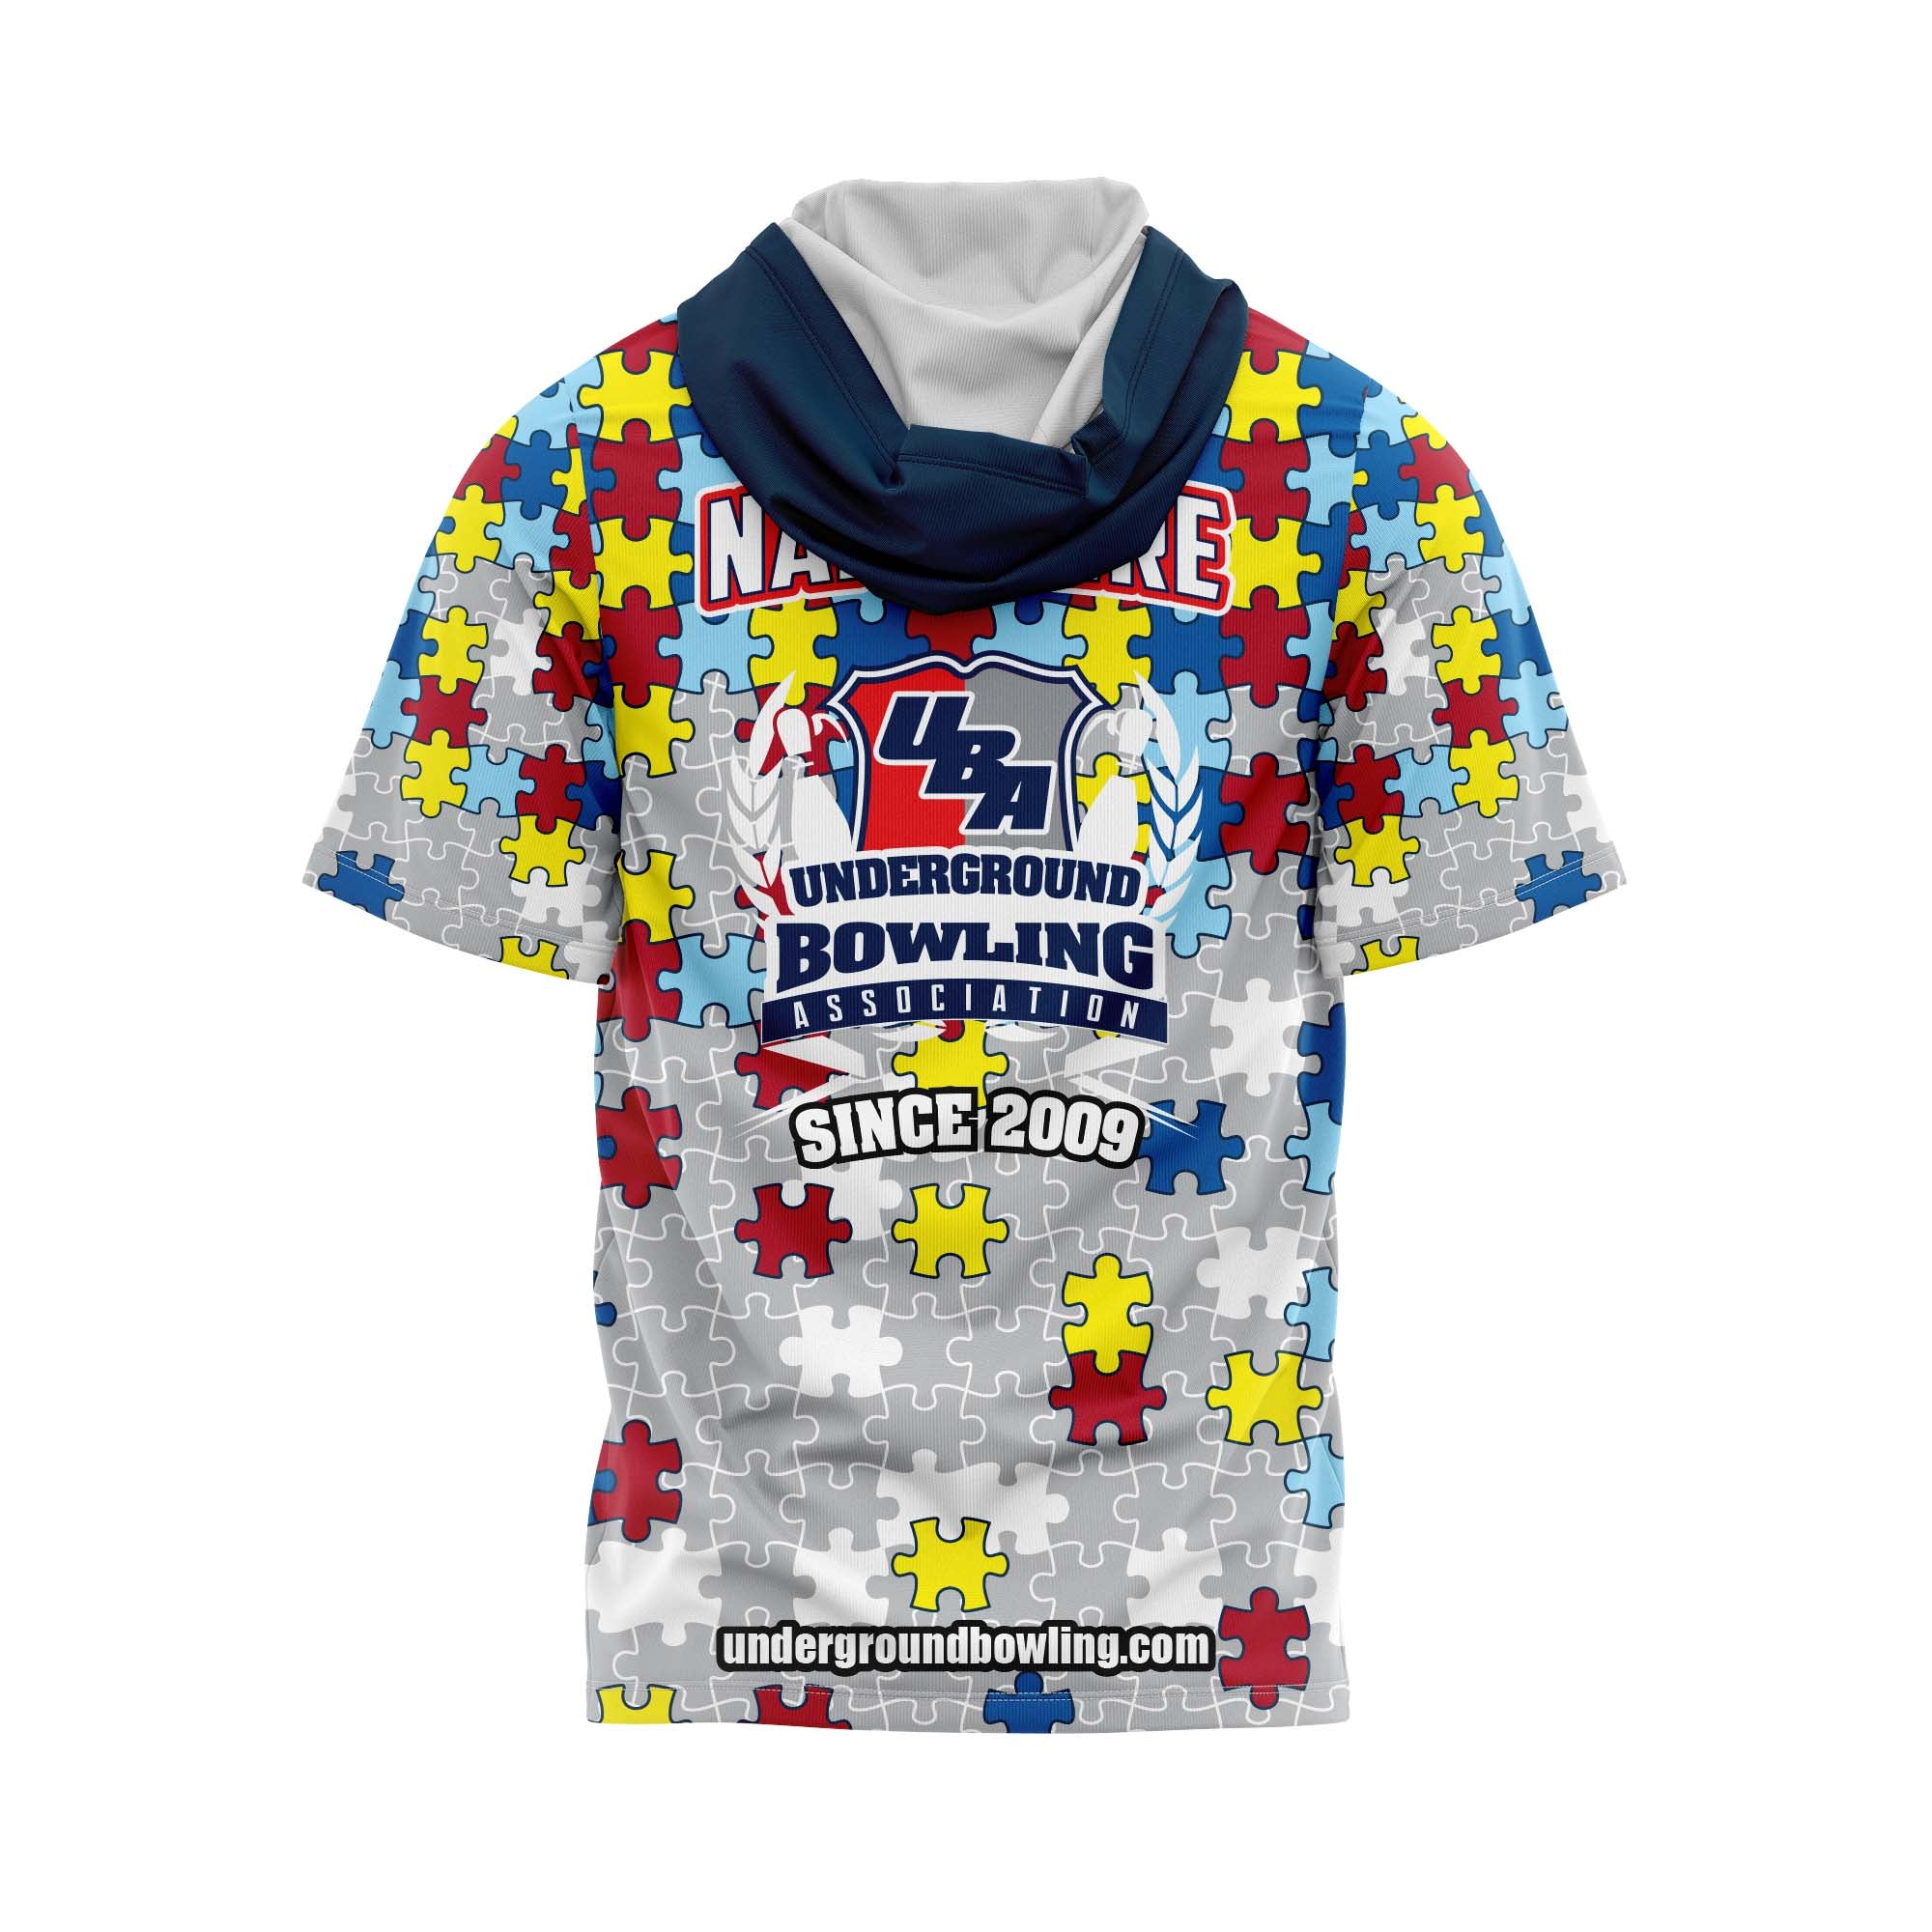 Taking Care Of Business Autism Jersey